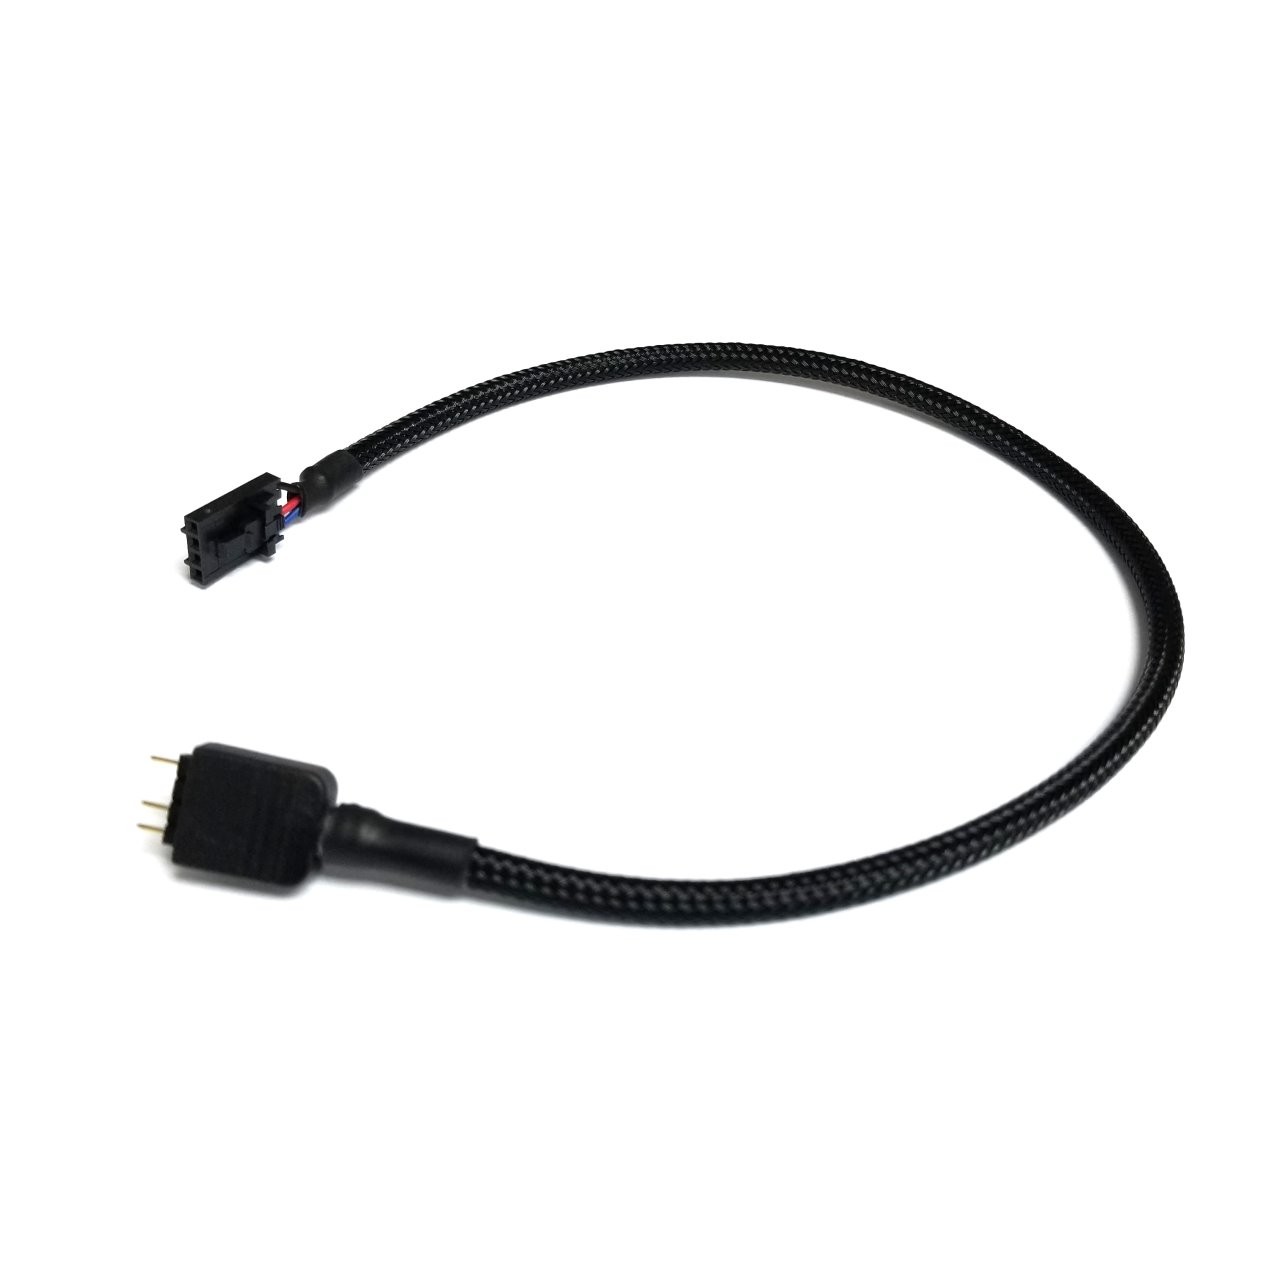 Uitgaven zwavel Scarp Corsair LED RGB 4 Pin to 5v RGB 3 Pin Male Connector Adapter Cable -  modDIY.com